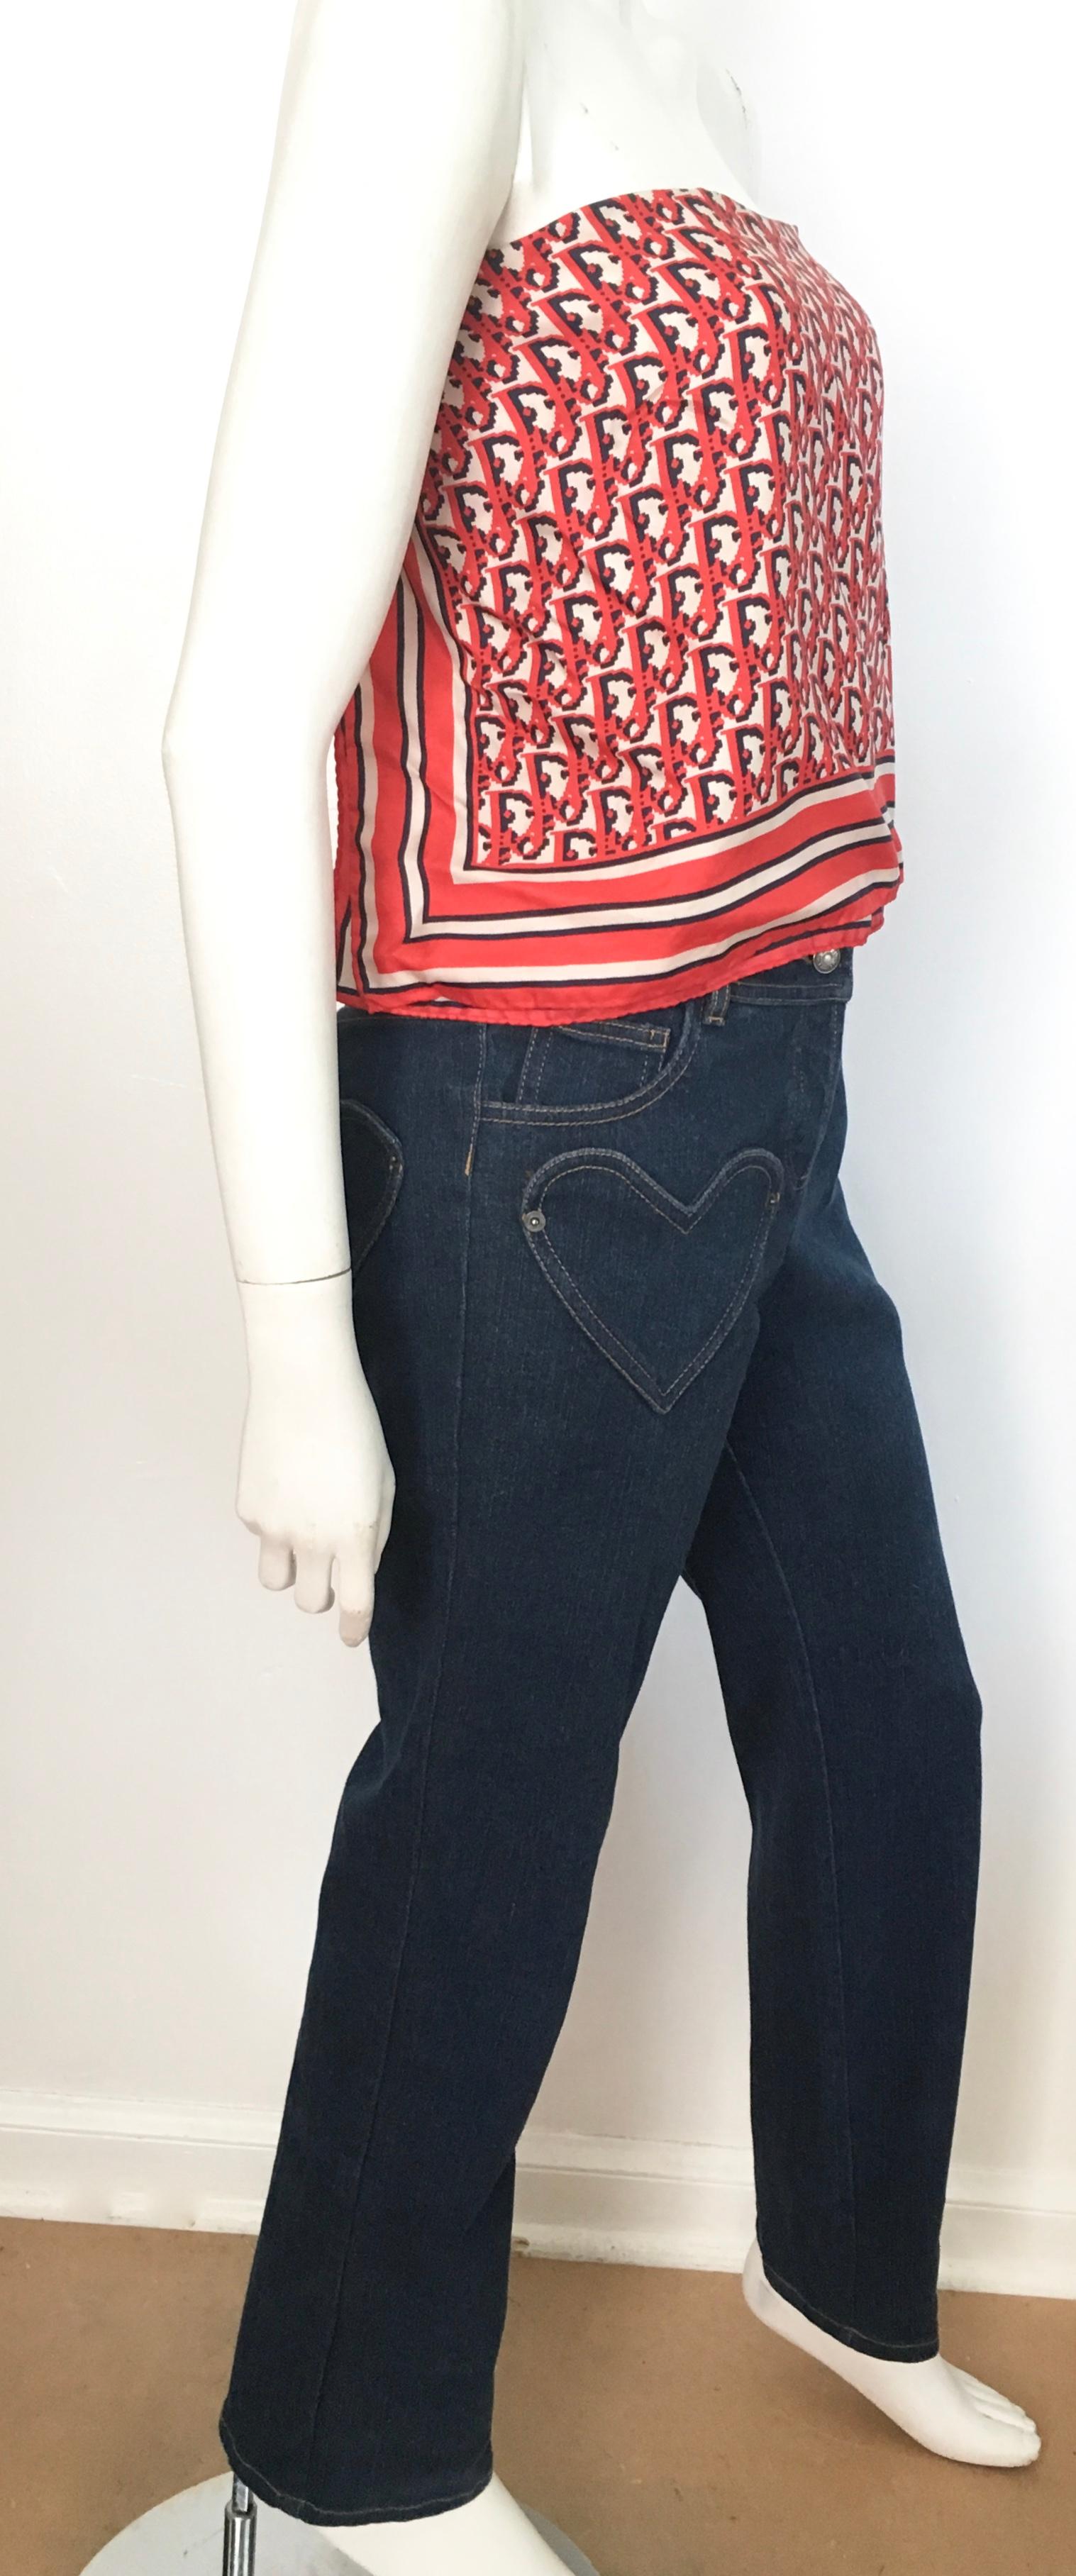 Women's or Men's Dior Denim Button Up Jeans with Heart Shape Pockets Size 6. 